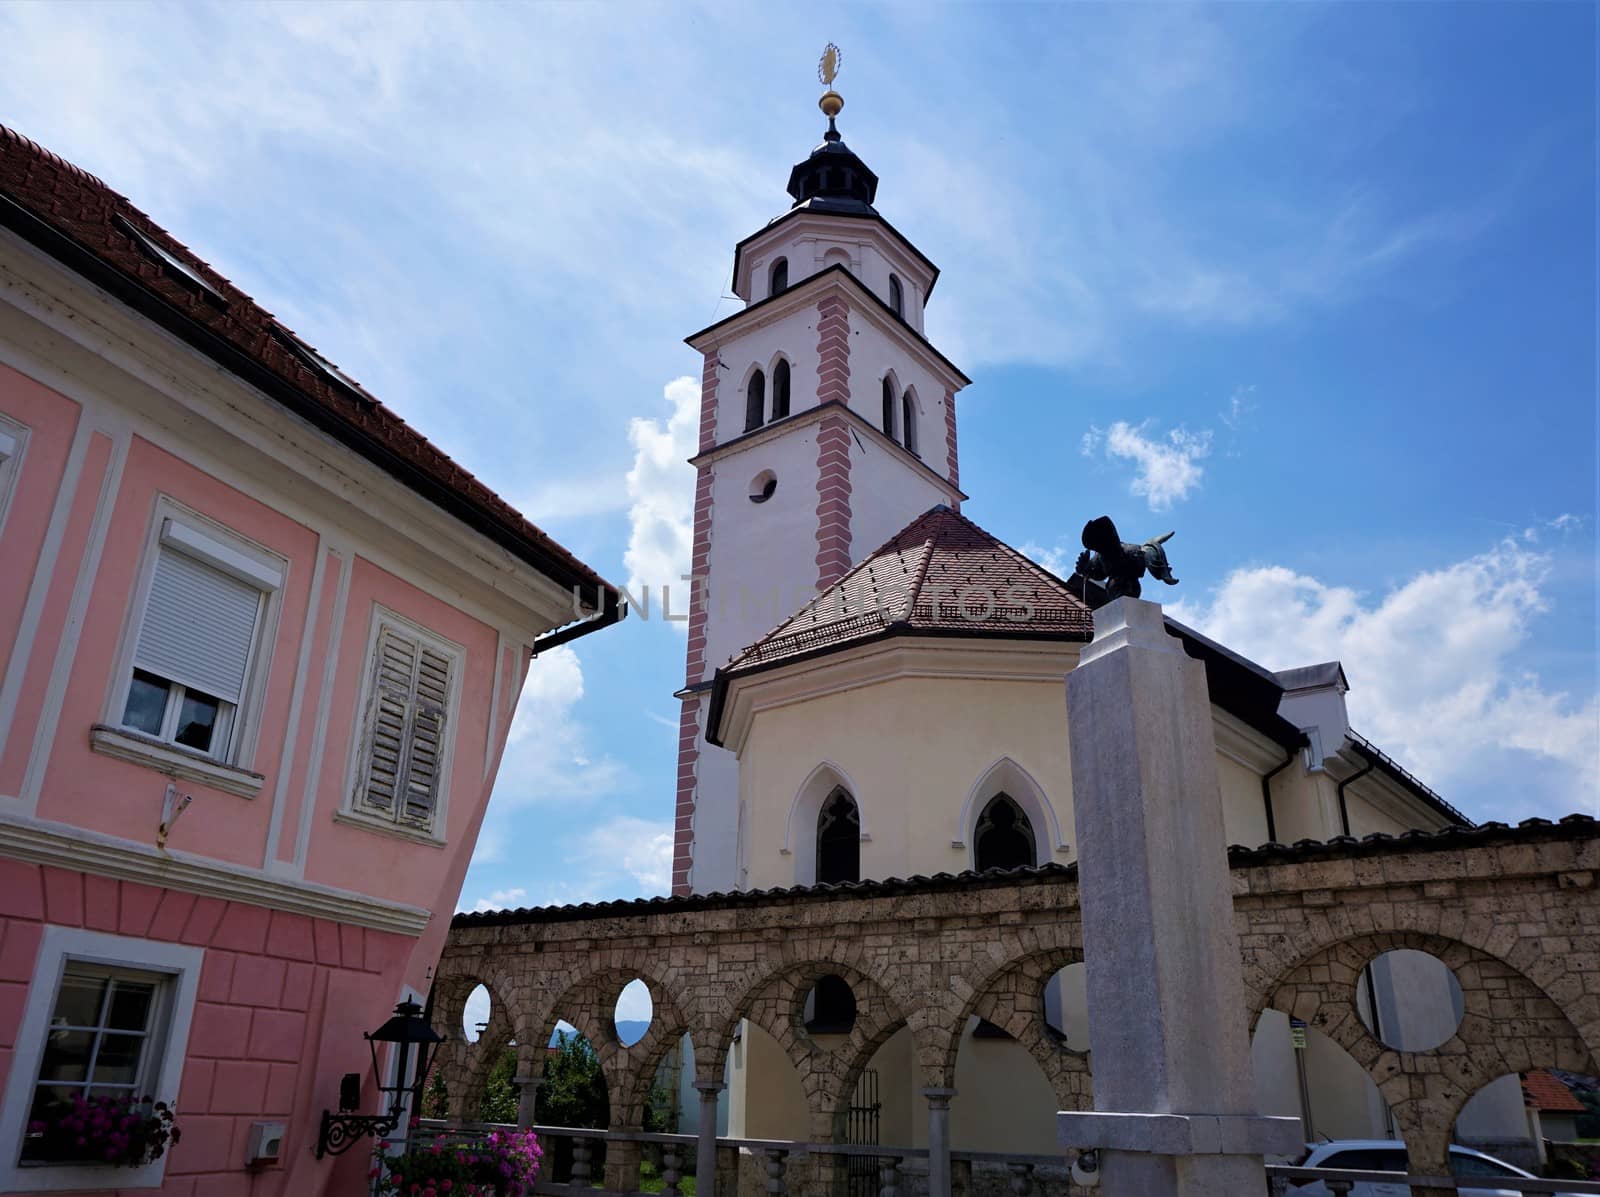 Pink house and St Roch's Church in Kranj, Slovenia by pisces2386